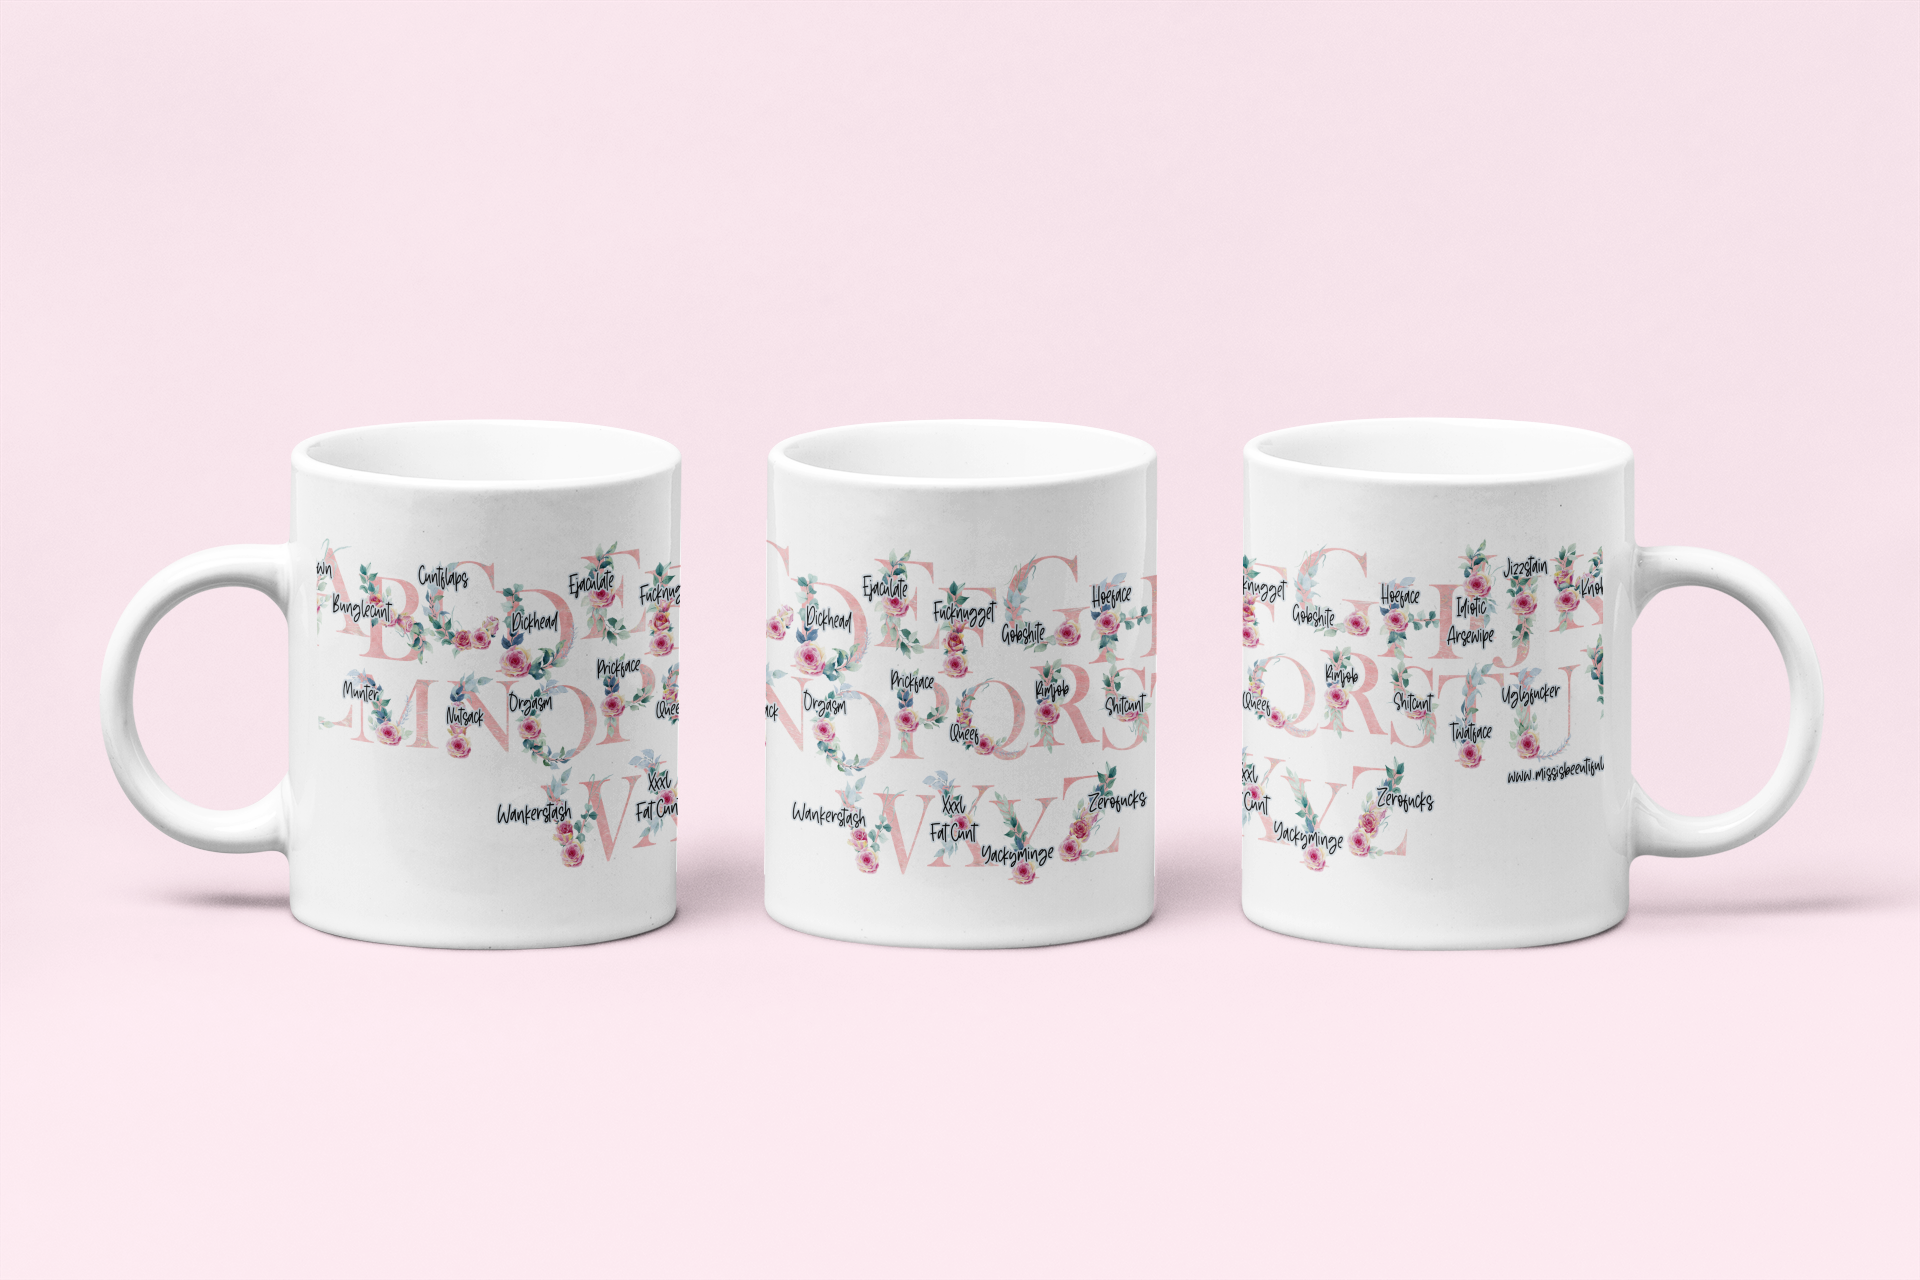 A white ceramic mug featuring a pink floral alphabet design around the whole of the mug. Each letter has a funny profanity word associated to it i.e, a for arseclown, b for bunglecunt.